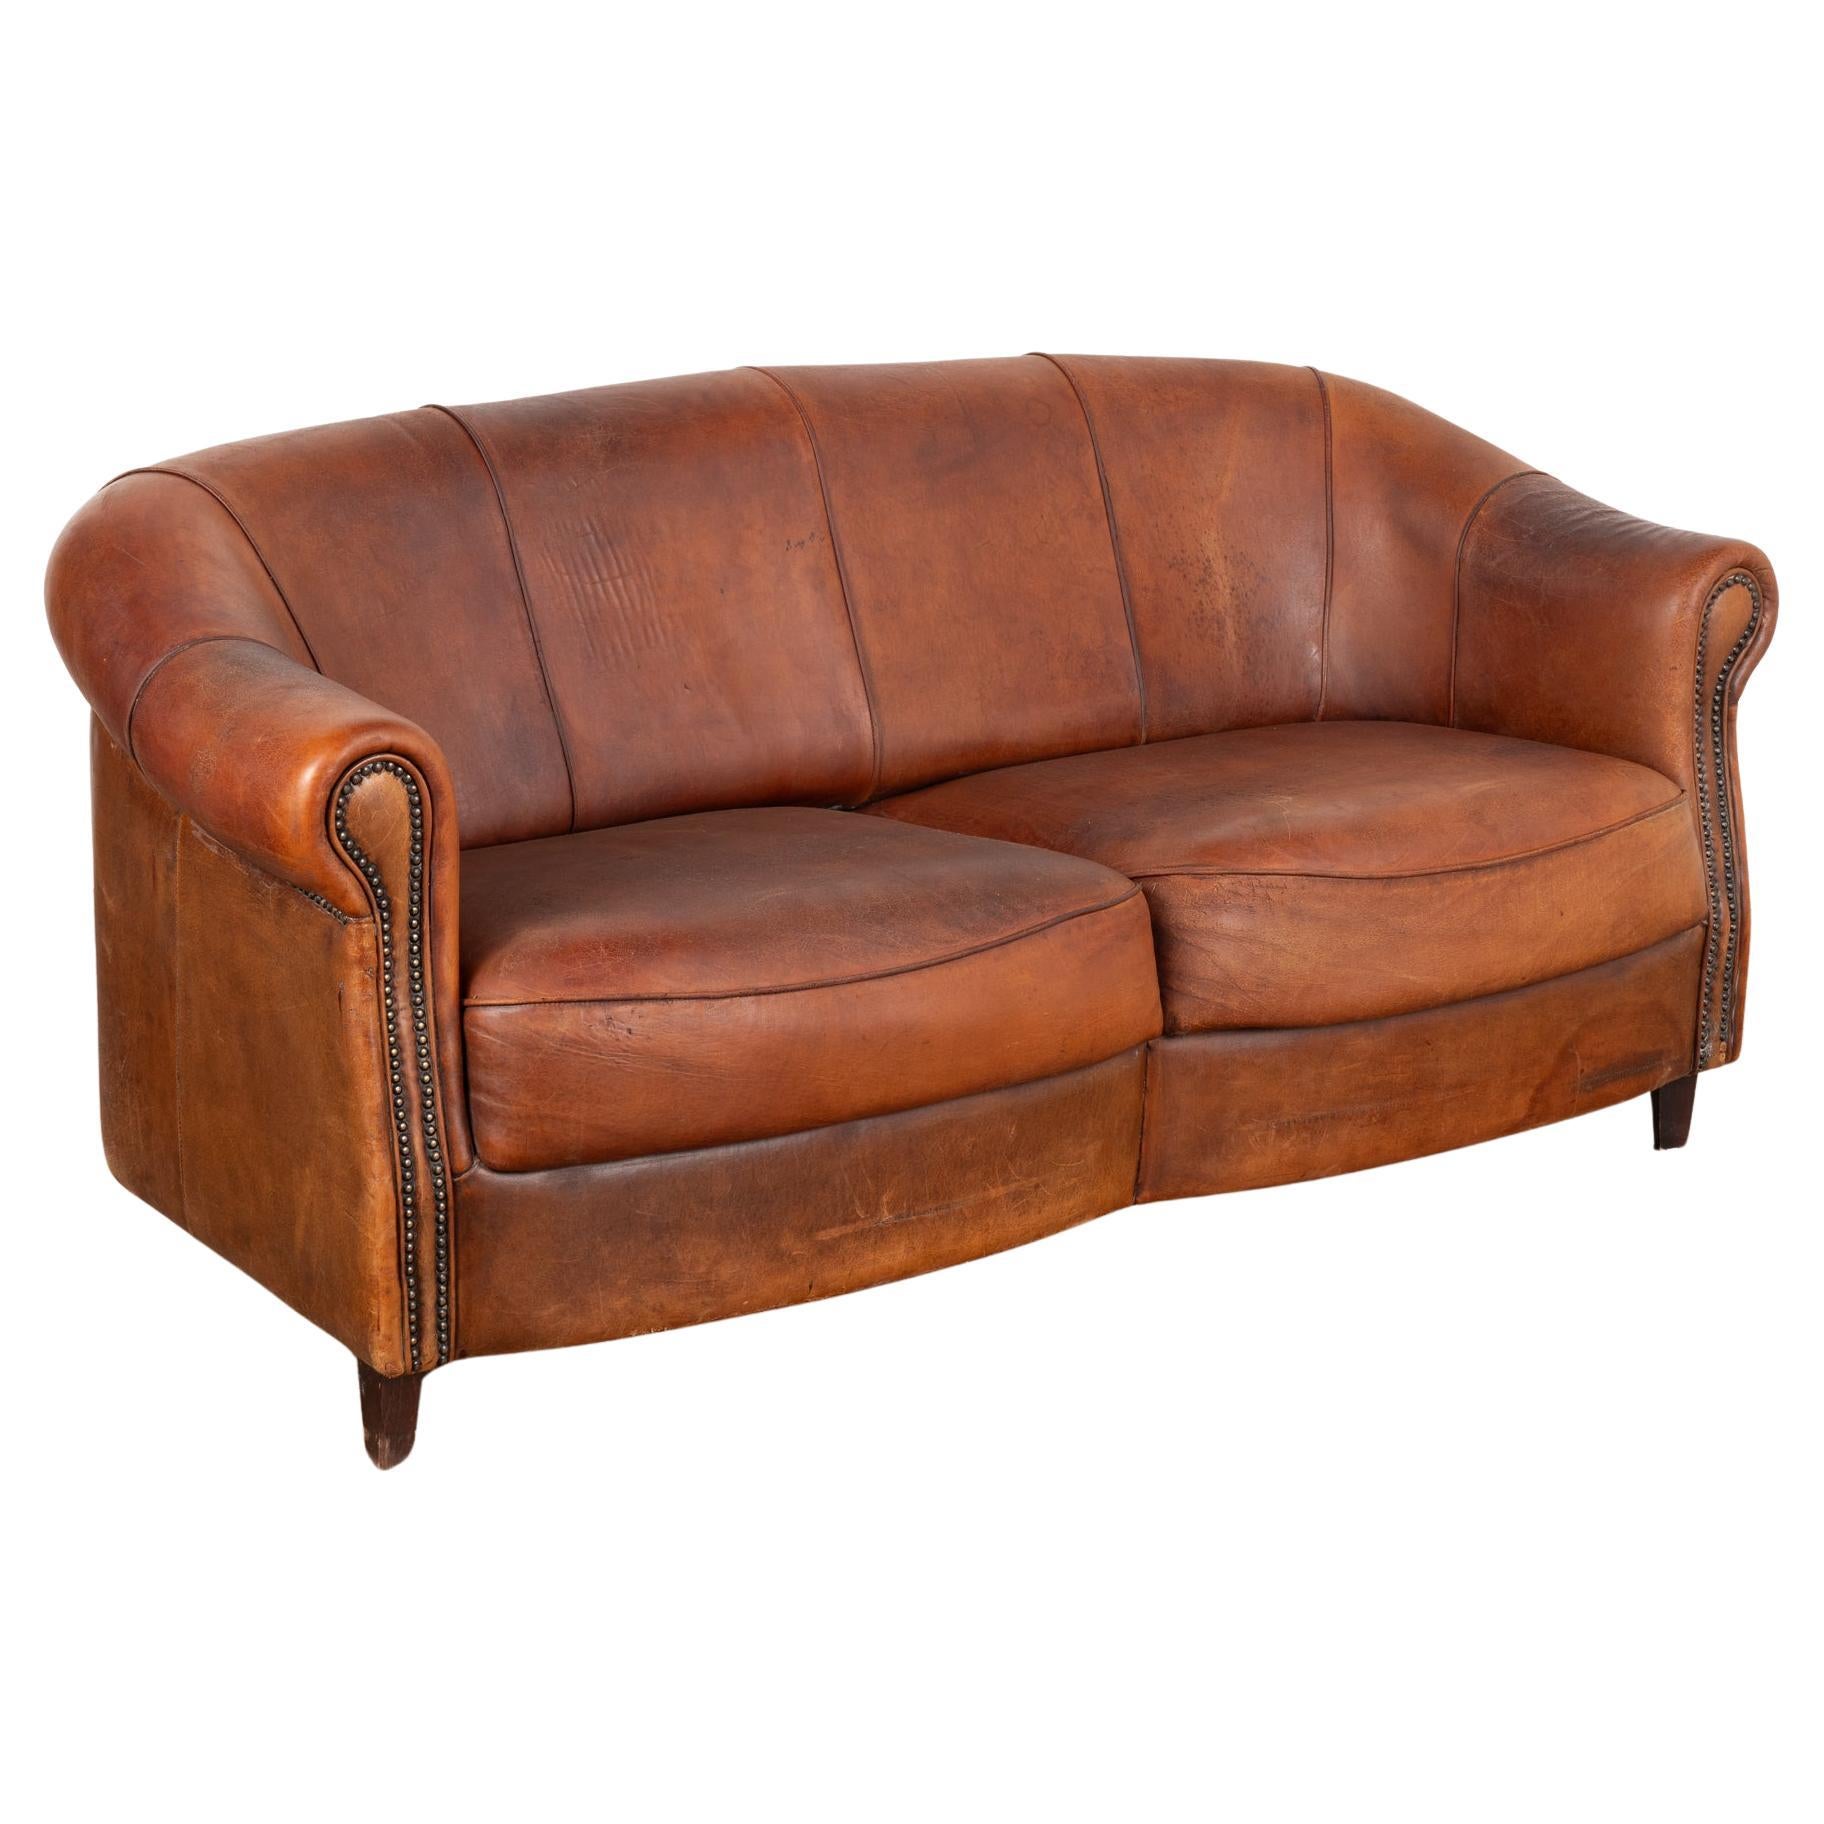 Vintage Brown Leather Two Seat Sofa Loveseat, France circa 1920-40